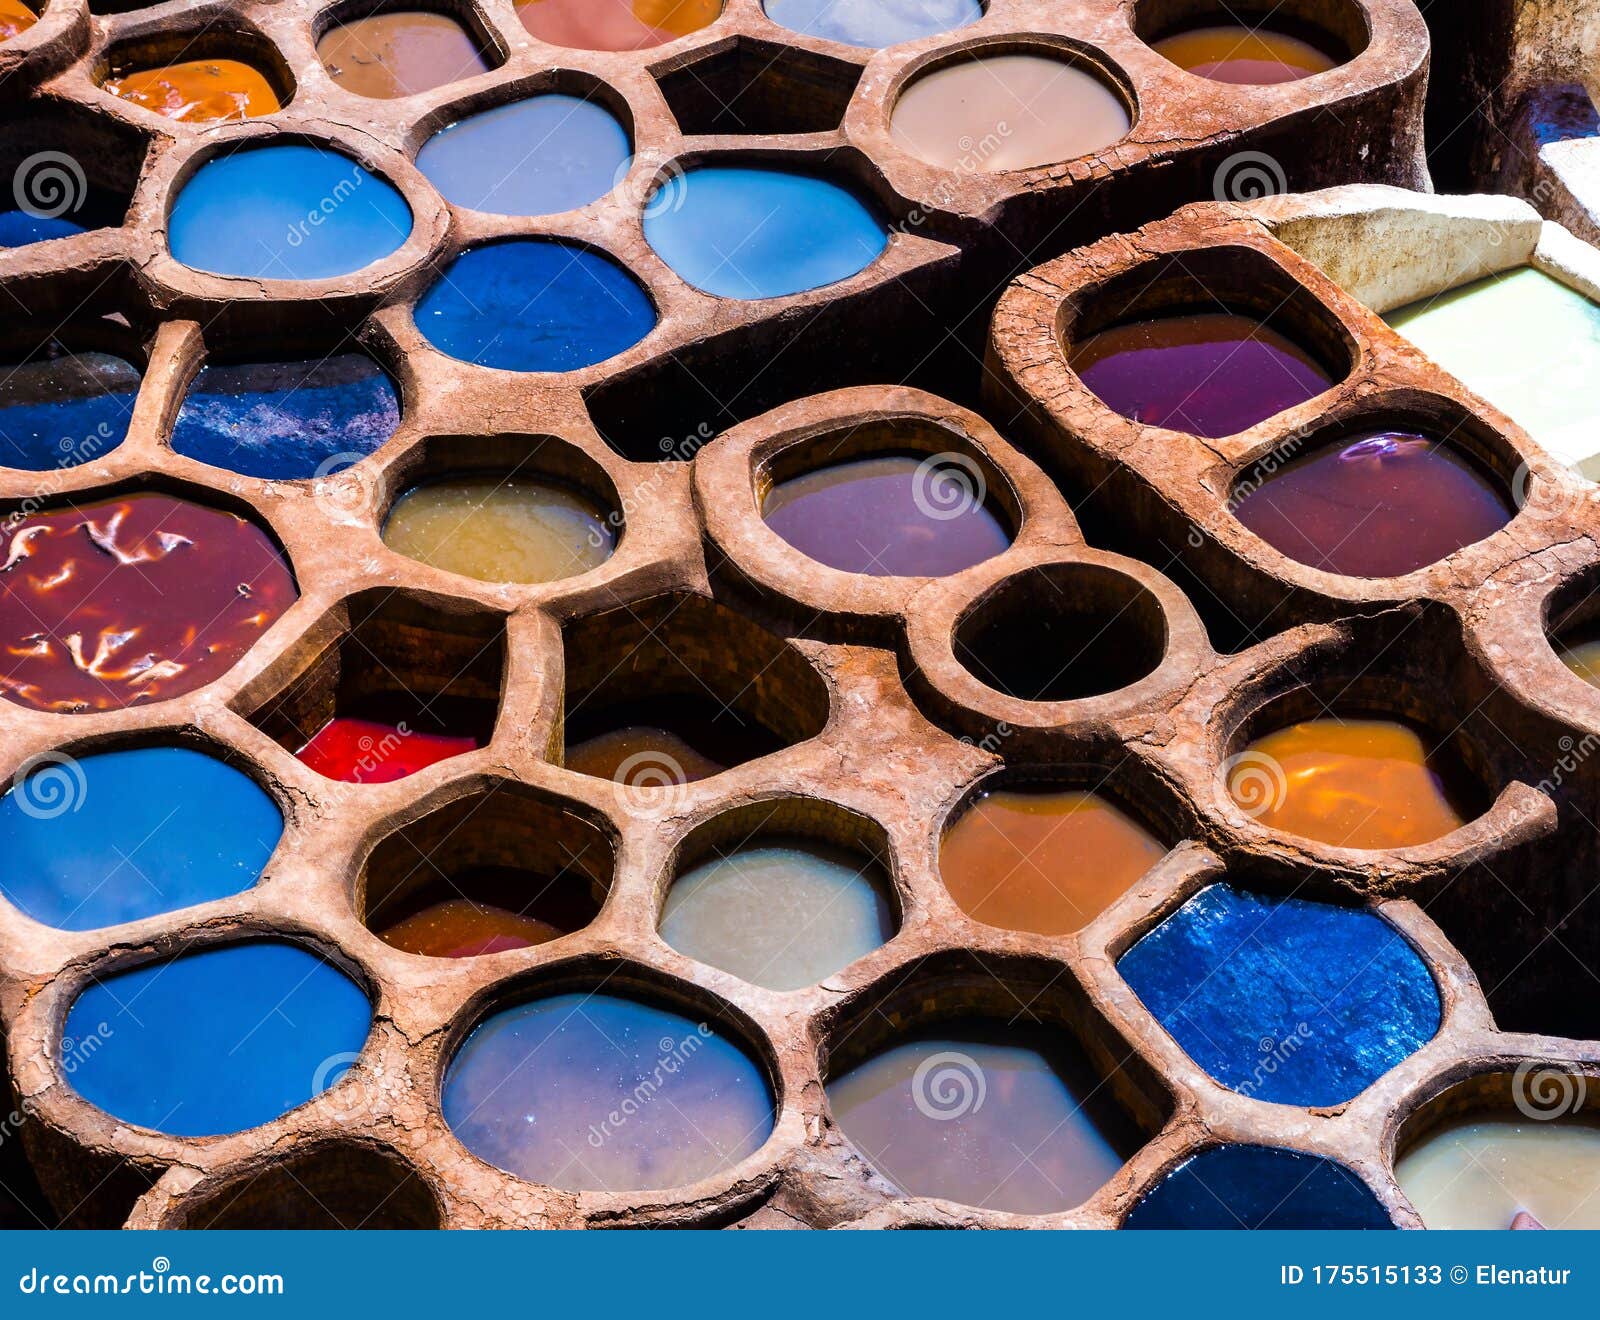 fez is also famous for its old leather tanneries. old tanks of the fez`s tanneries with color paint for leather, morocco, africa.